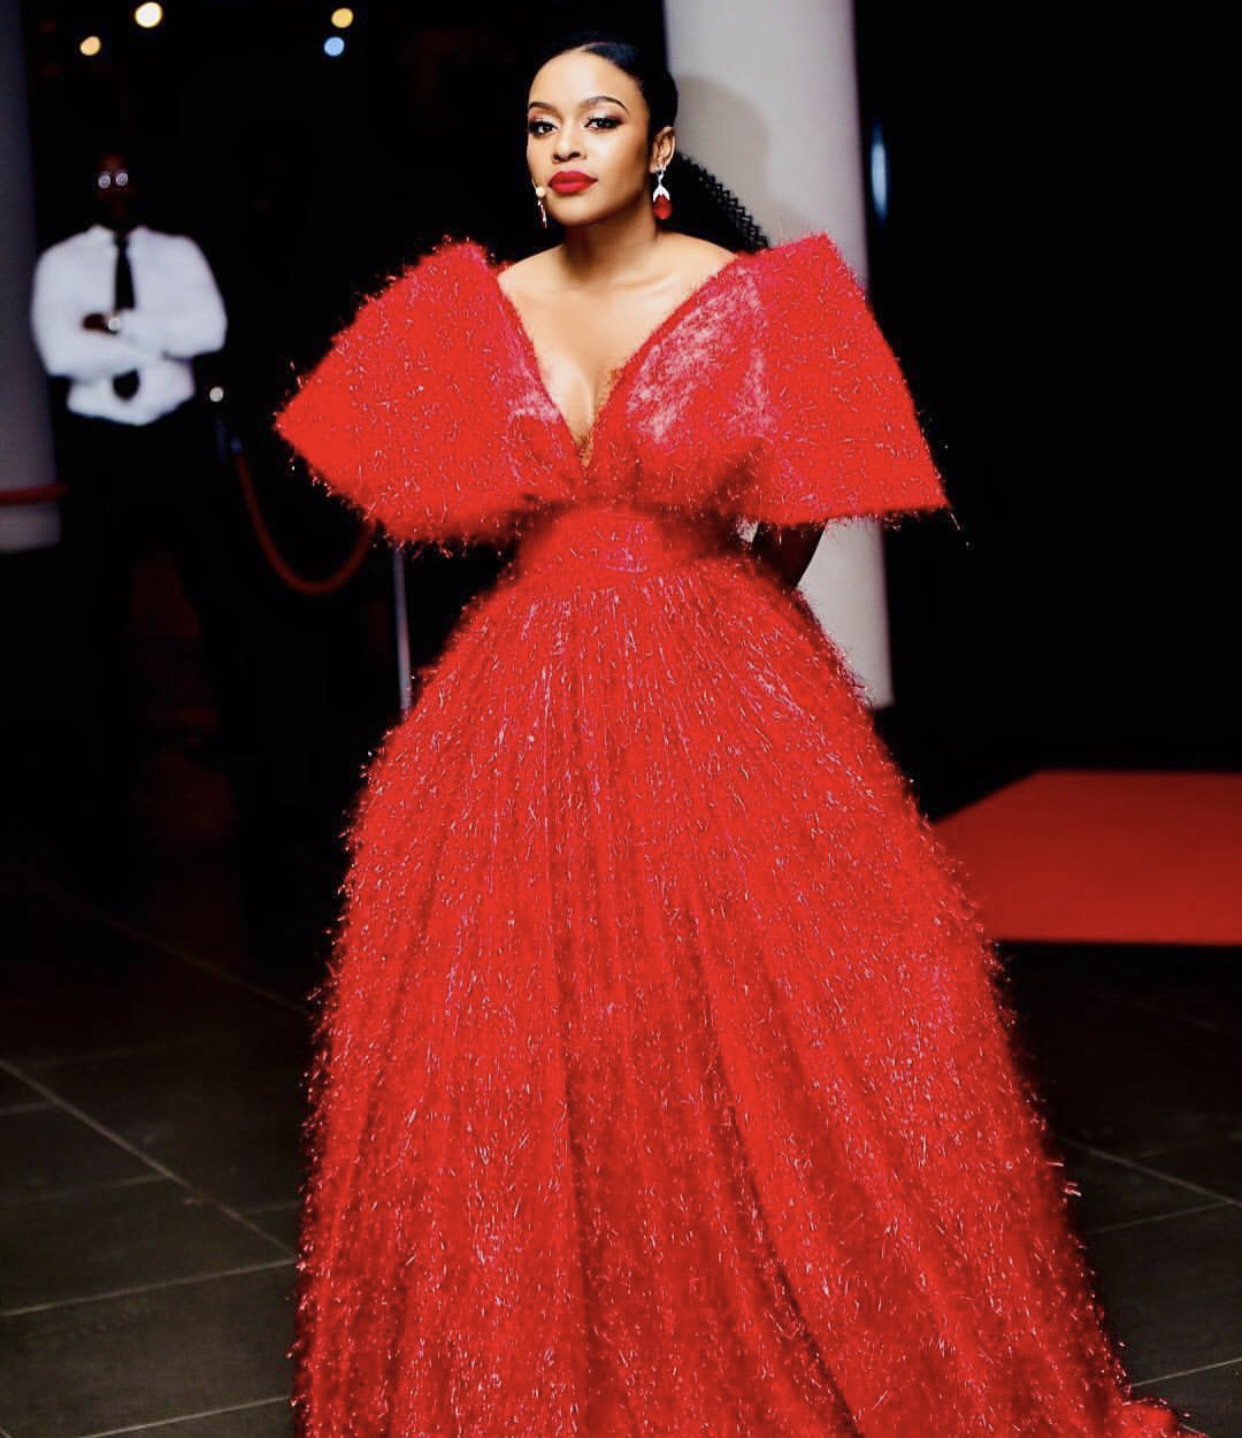 10-times-sa-actress-nomzamo-mbatha-ruled-the-red-carpet-in-2018